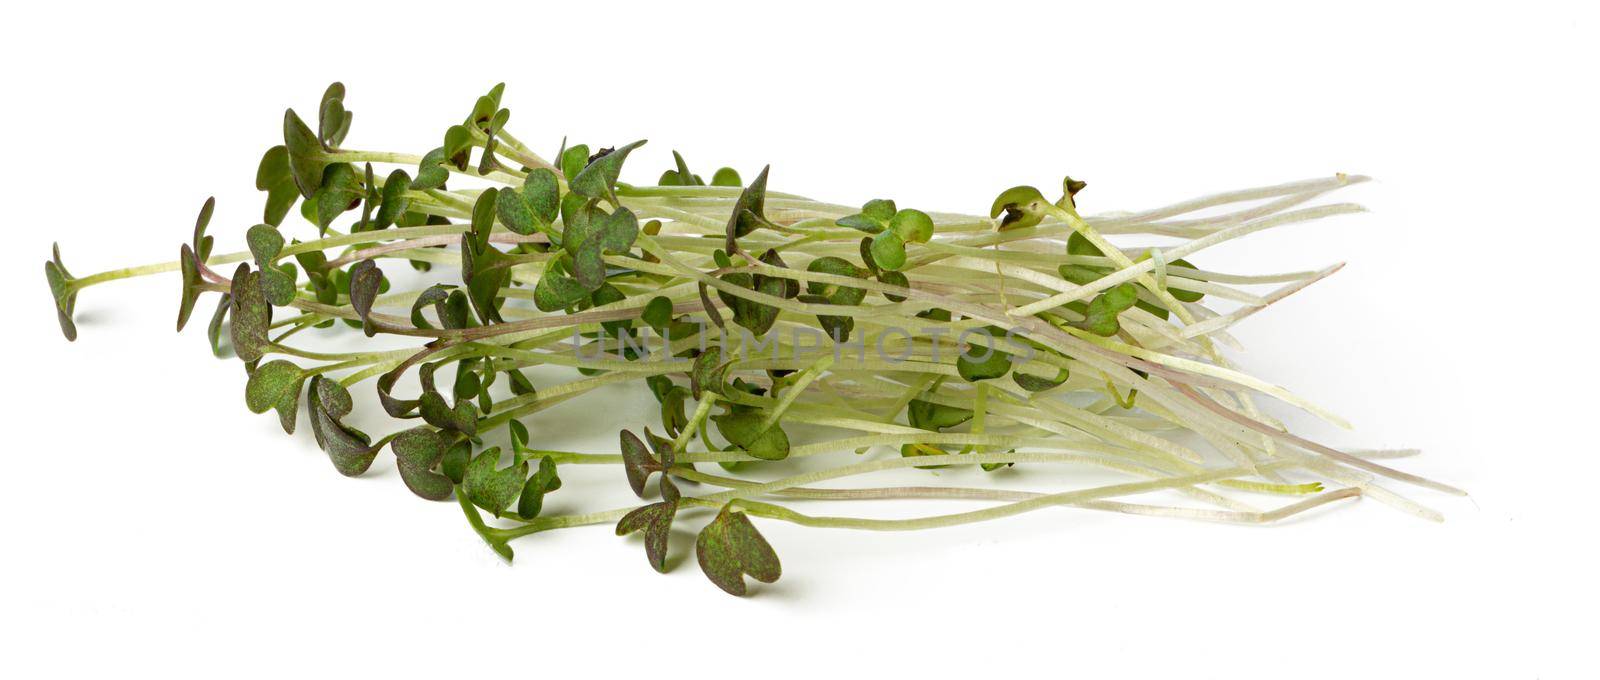 Bunch of micro green sprouts isolated on white background by Fabrikasimf